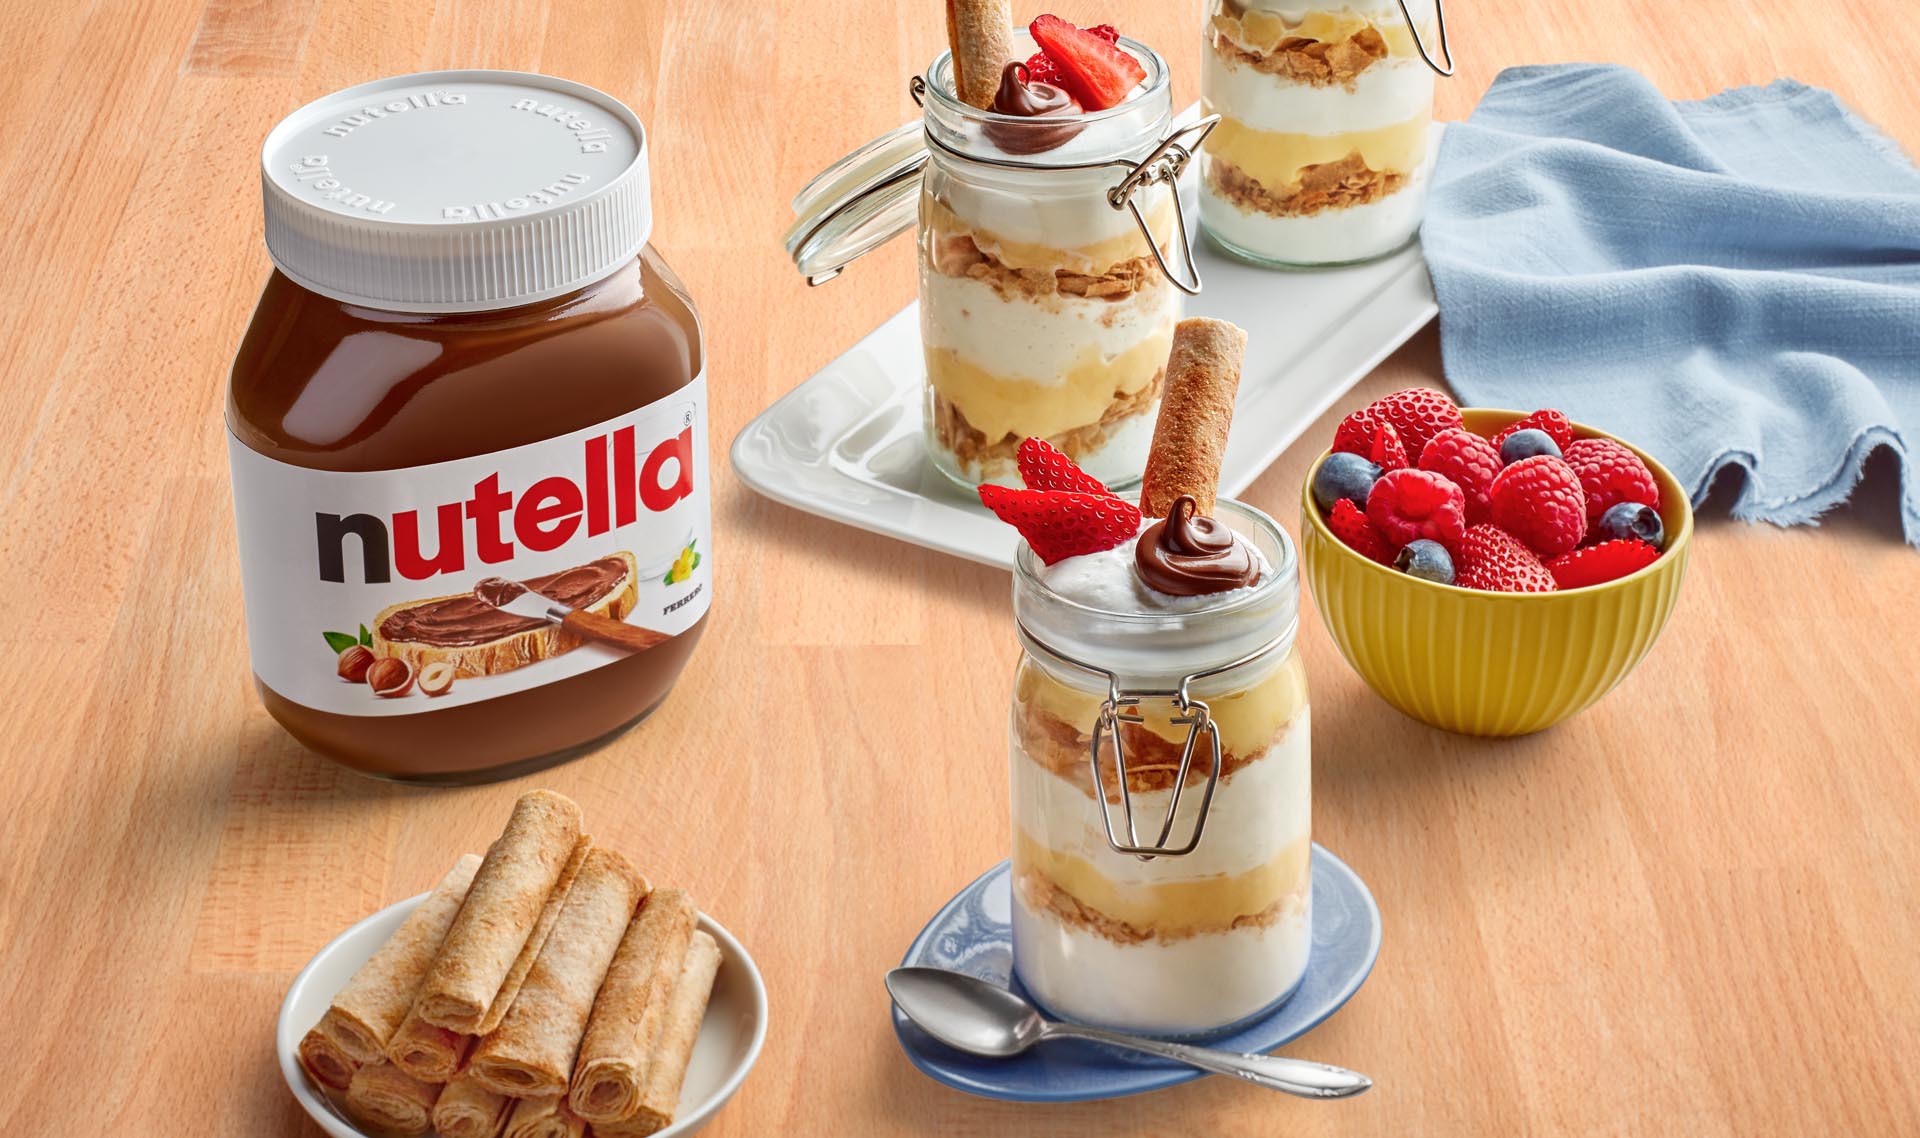 Darabeel Pudding with Nutella®